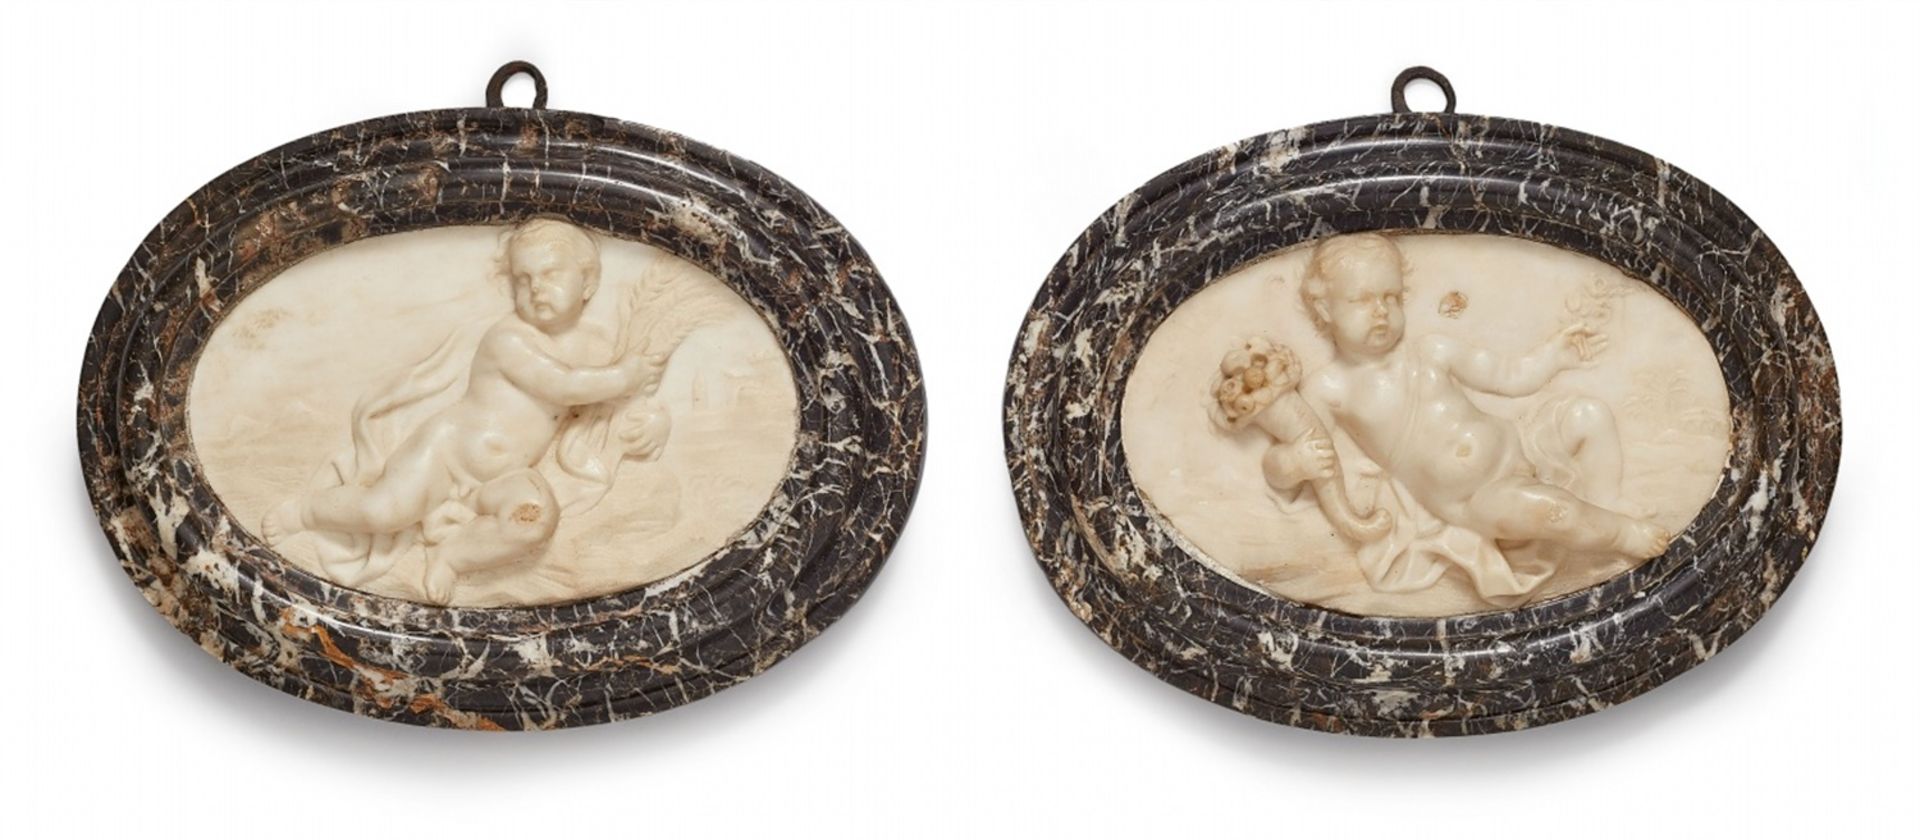 A pair of relief plaques with allegories of spring and summerWhite Carrara marble oval plaques in